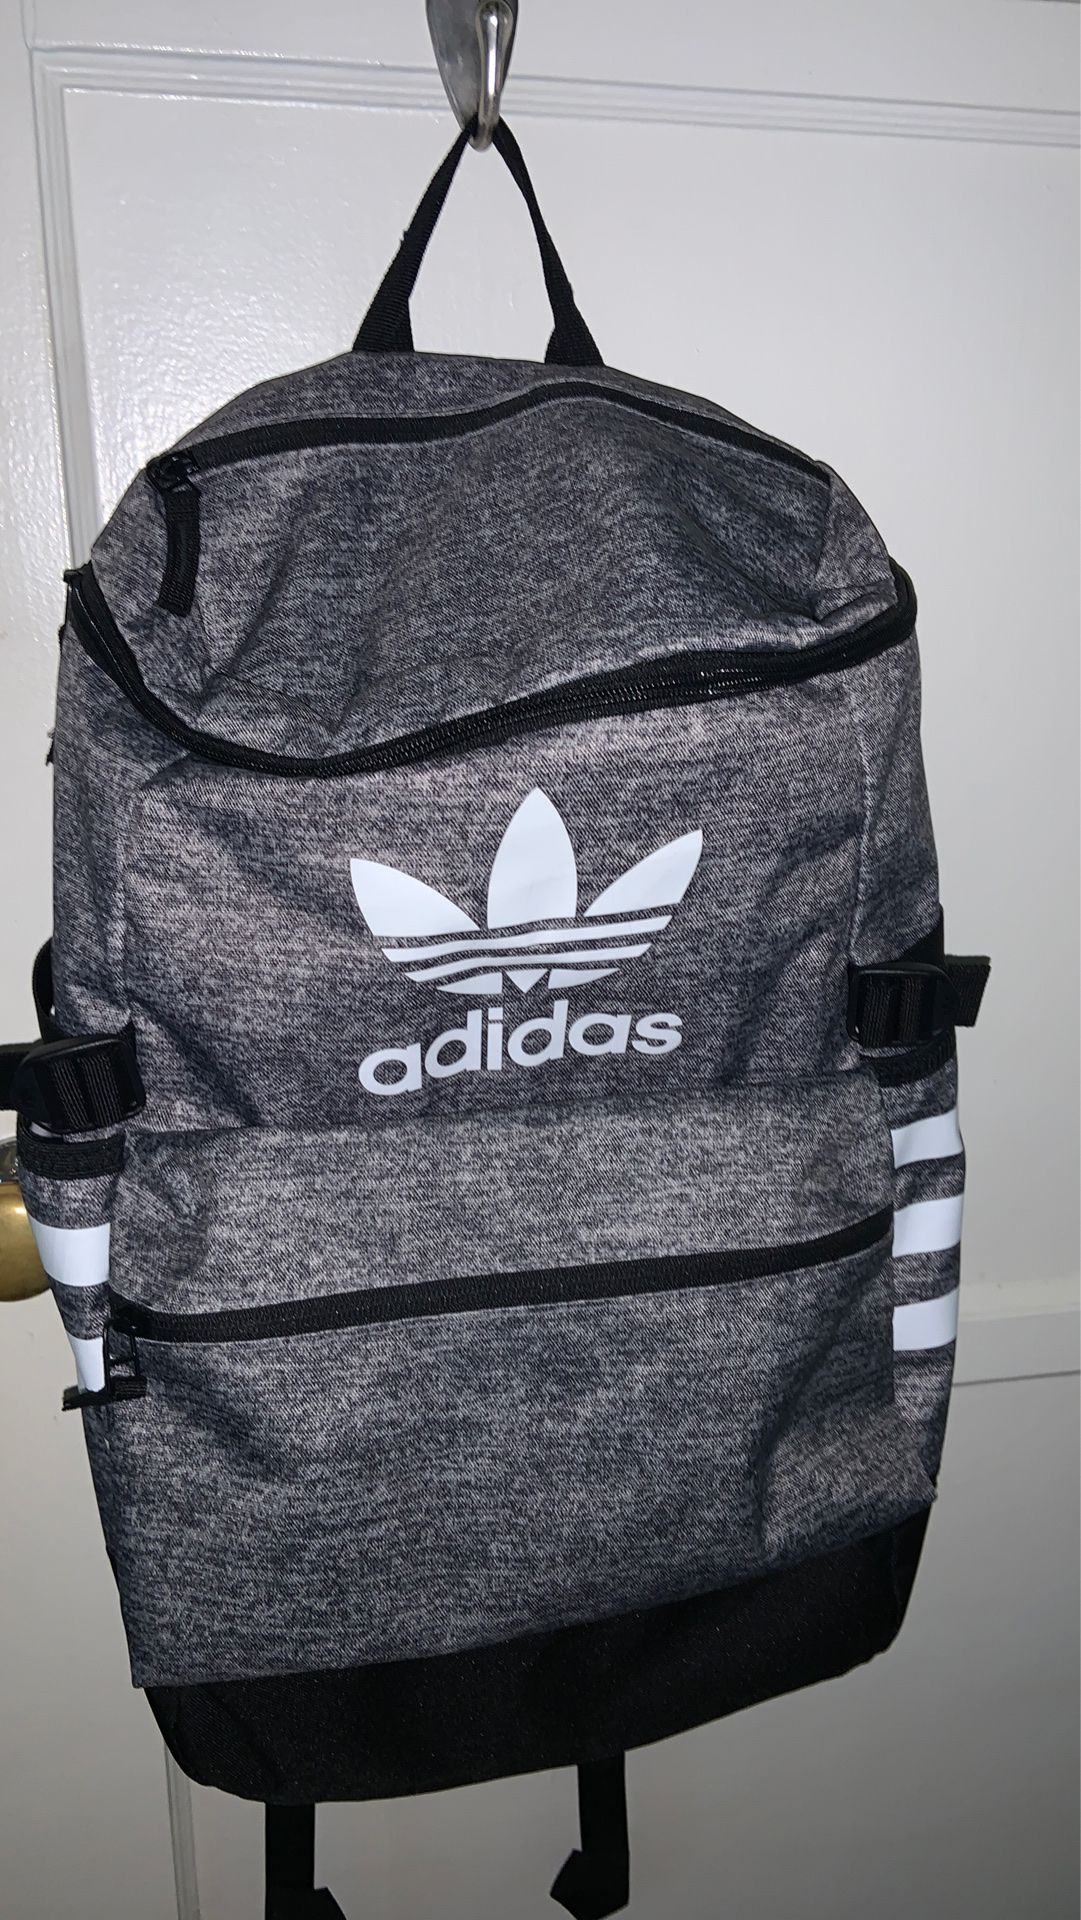 brand new adidas backpack